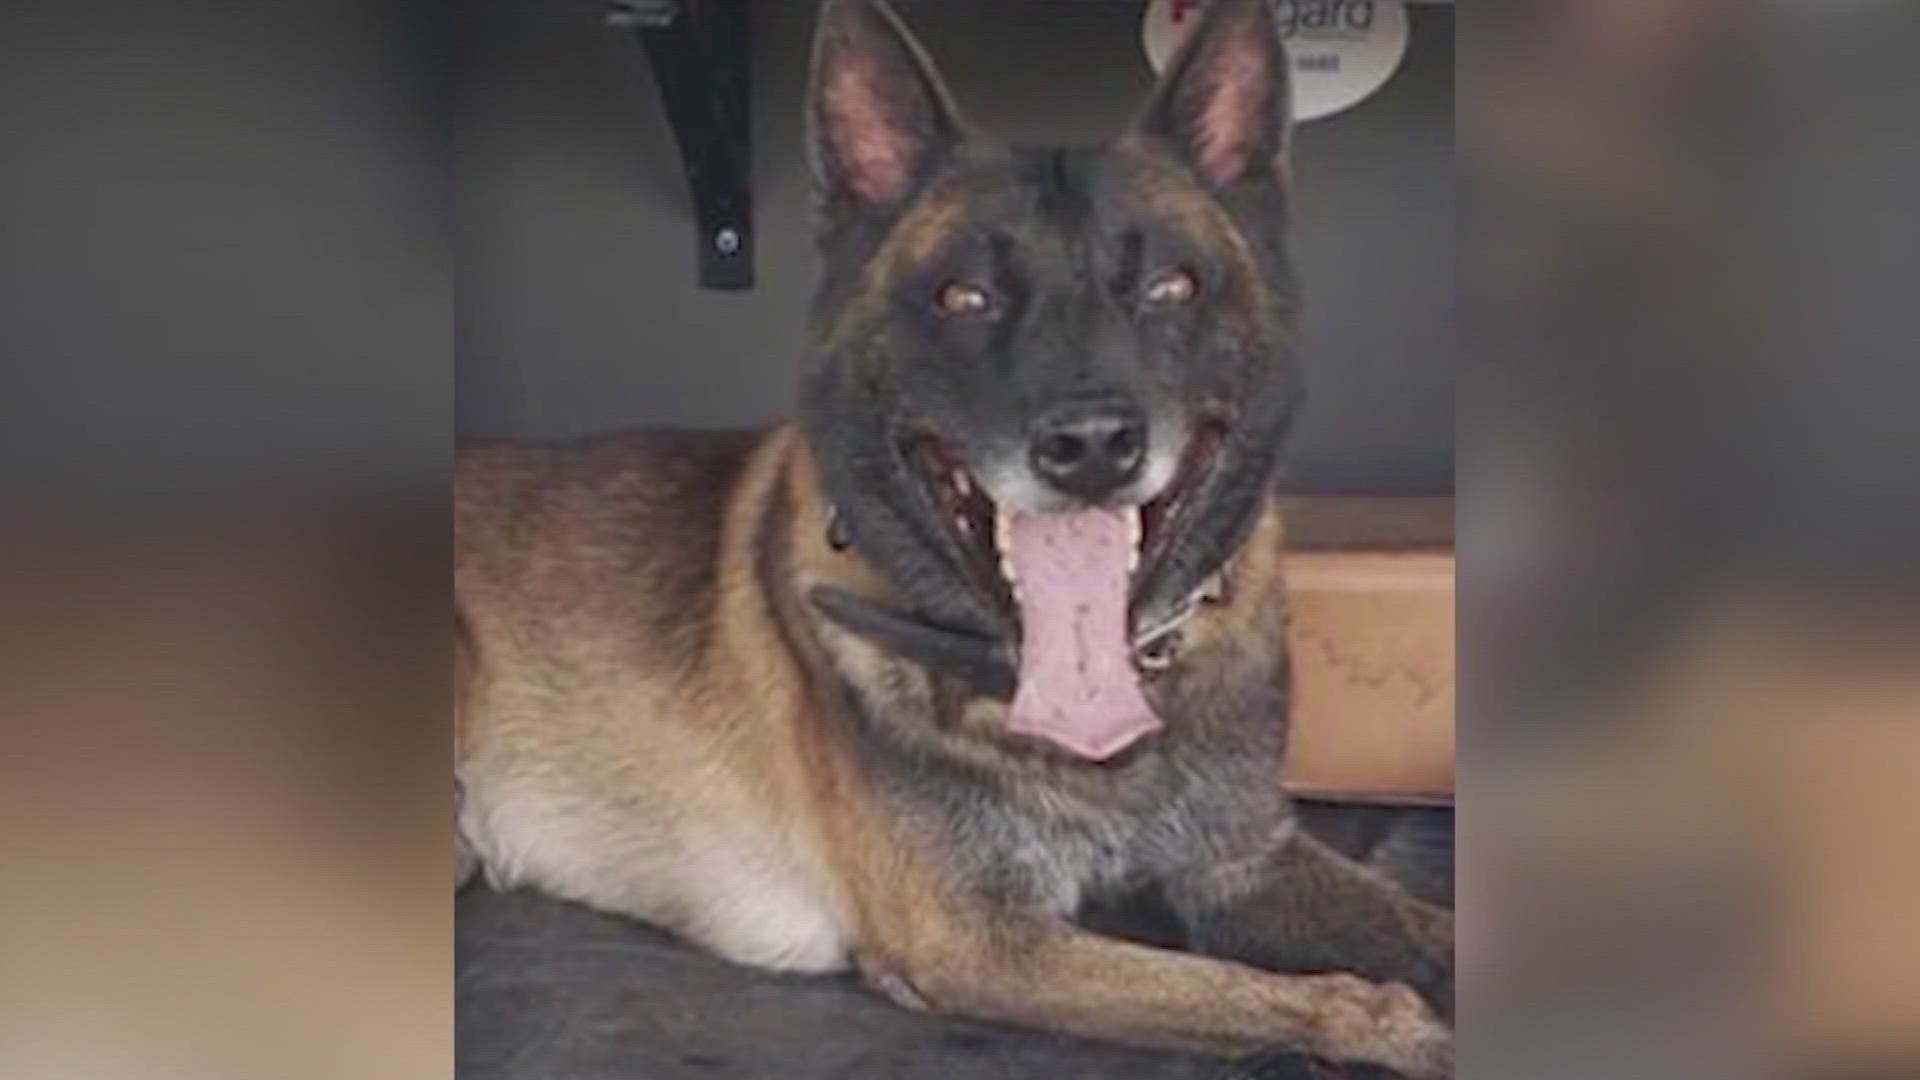 The 5-year-old Belgian Malinois died from a single gunshot wound to the thorax, which is essentially the chest, shot at fairly close range.